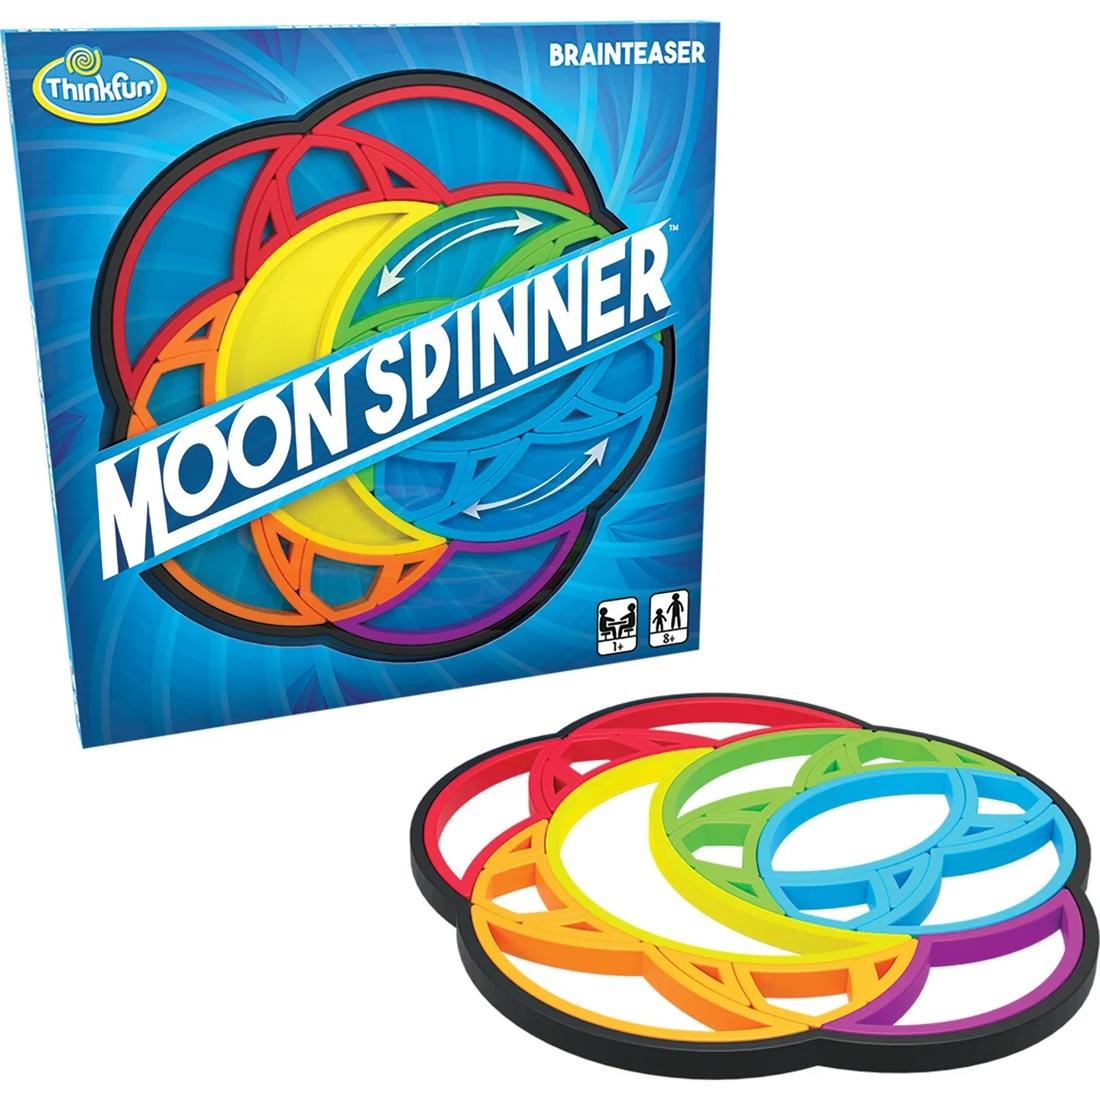 Thinkfun Moon Spinner shown both in and out of package